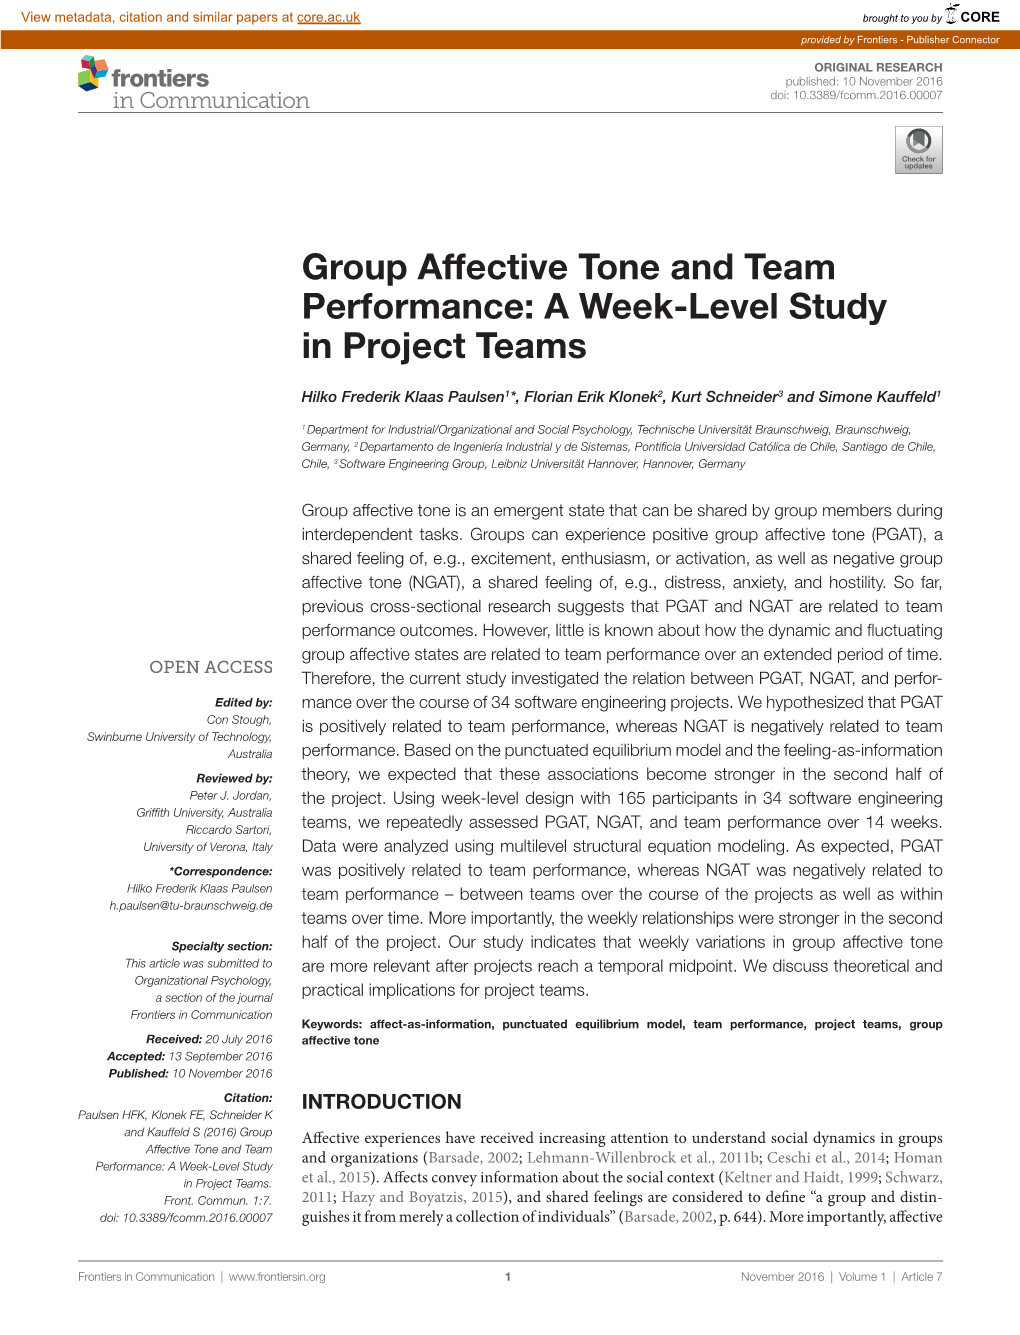 Group Affective Tone and Team Performance: a Week-Level Study in Project Teams